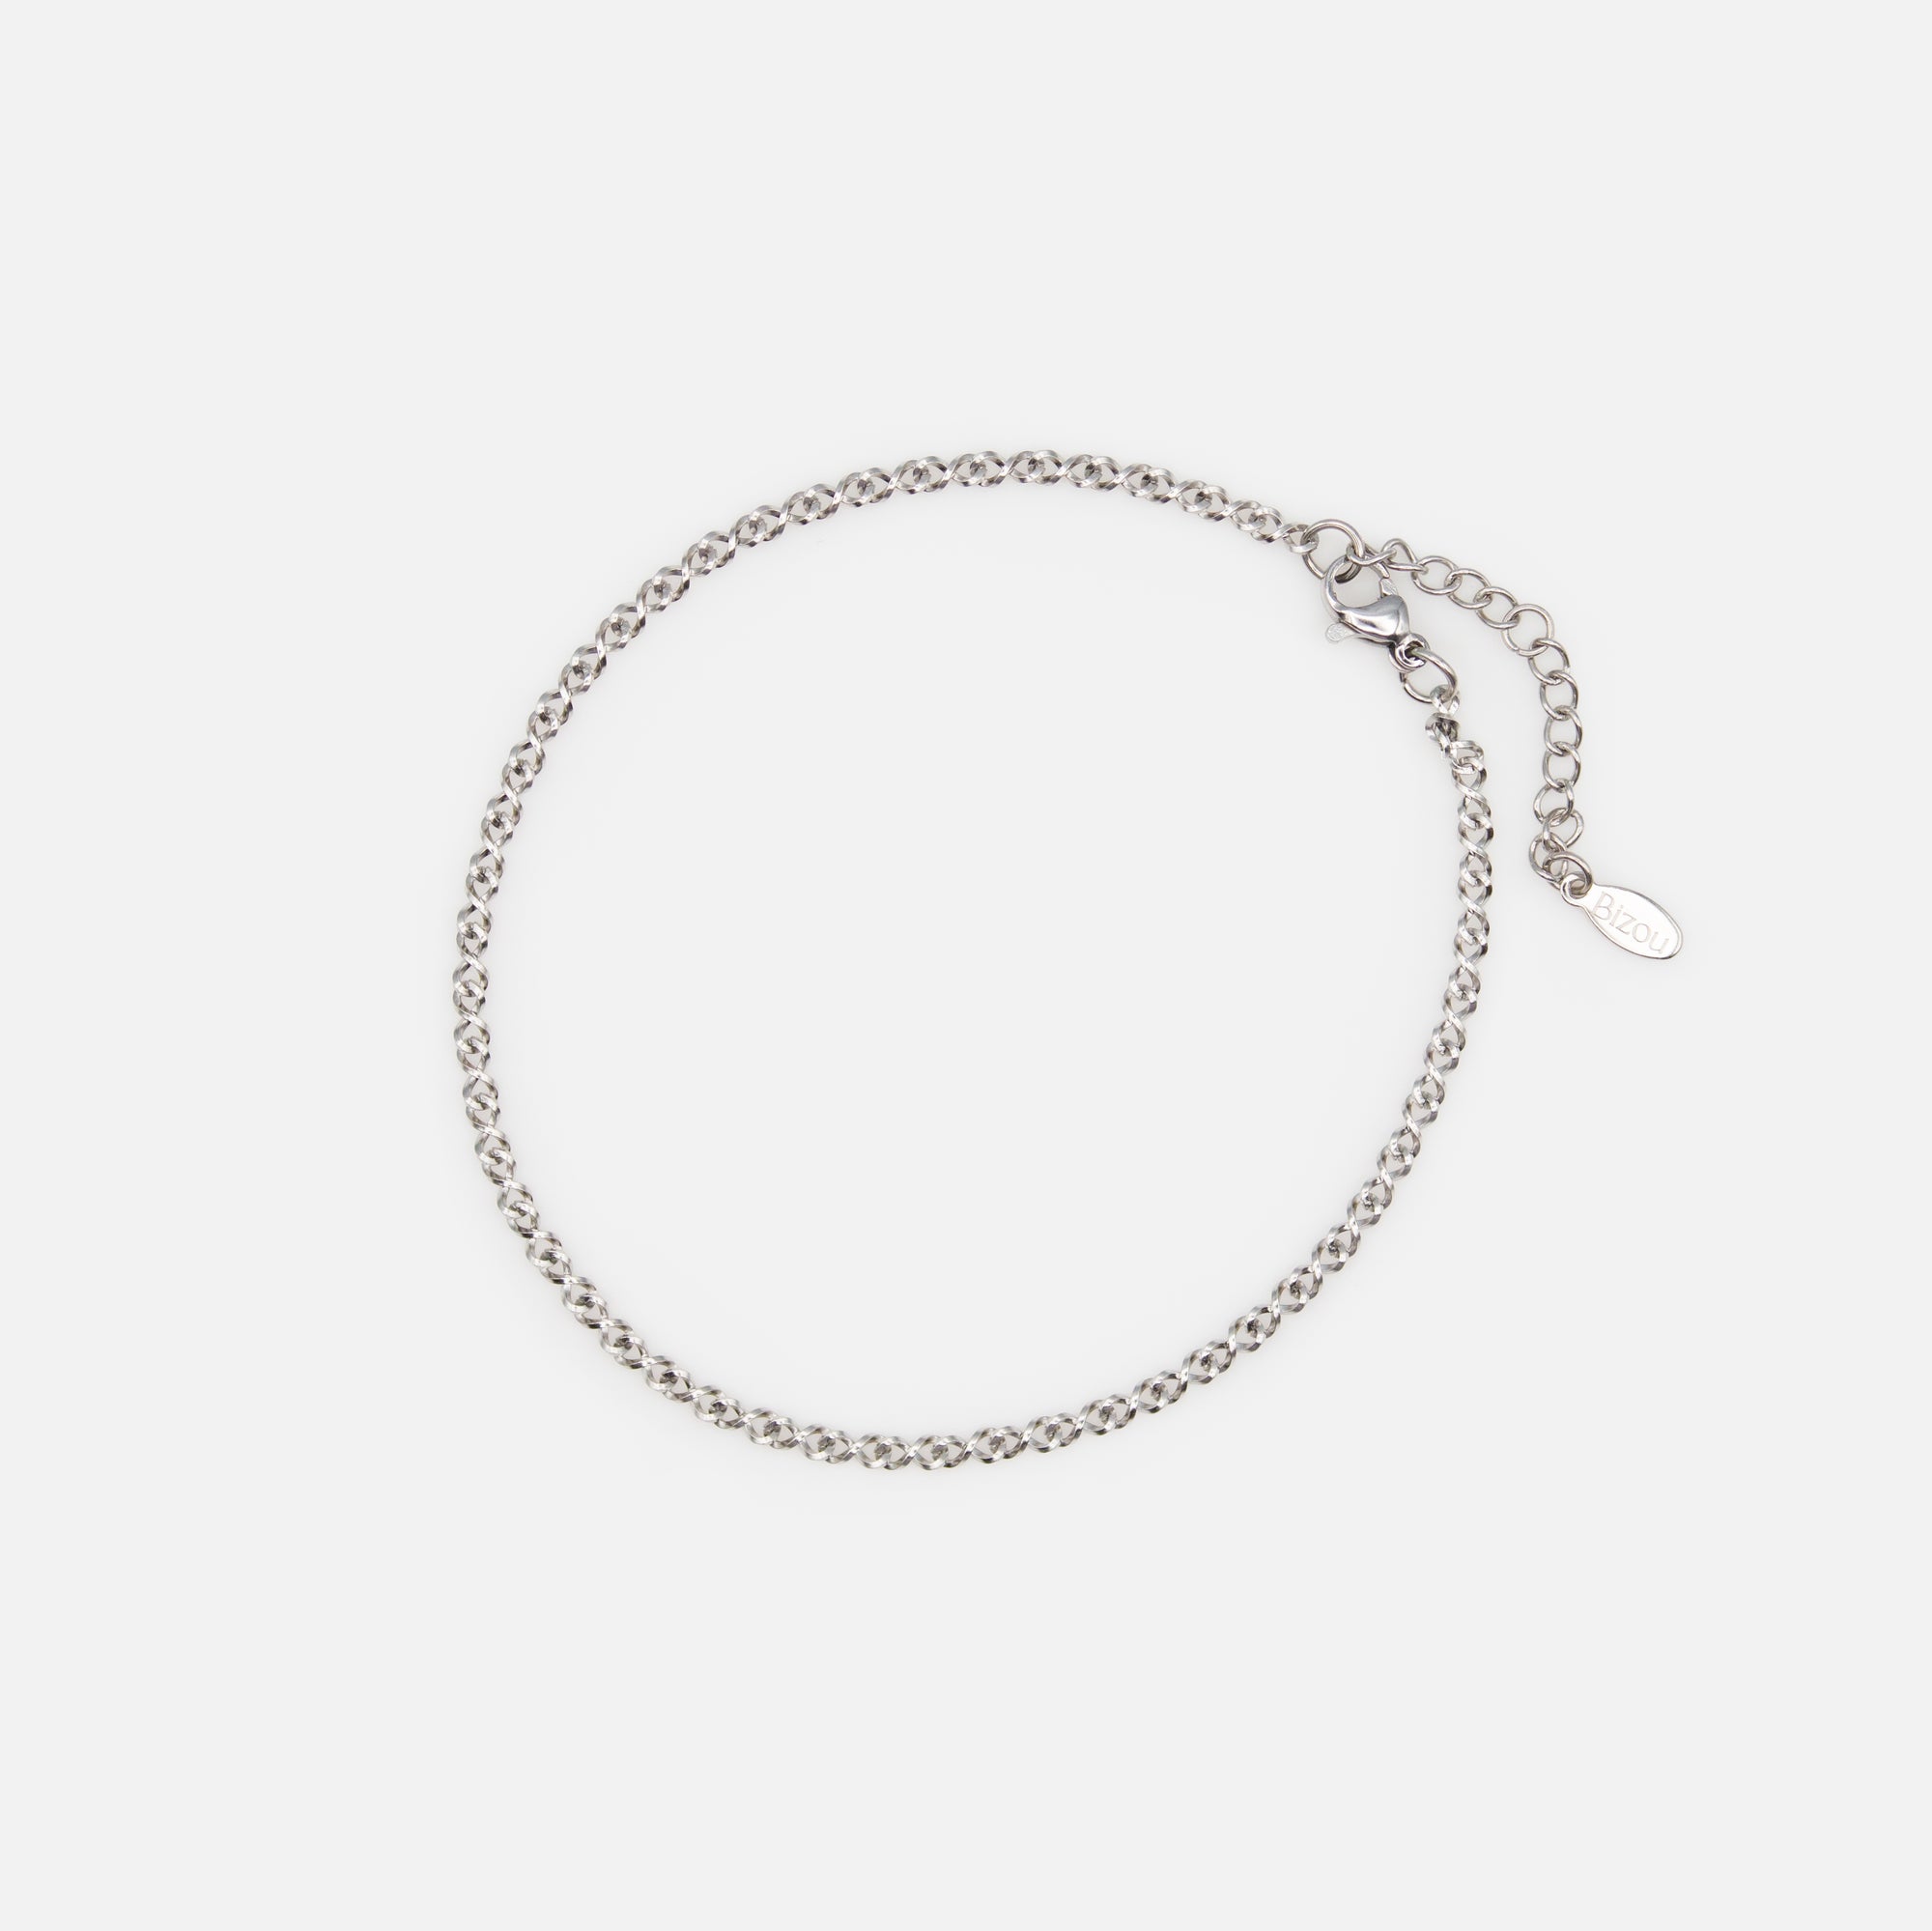 Silver anklet with stainless steel infinite links